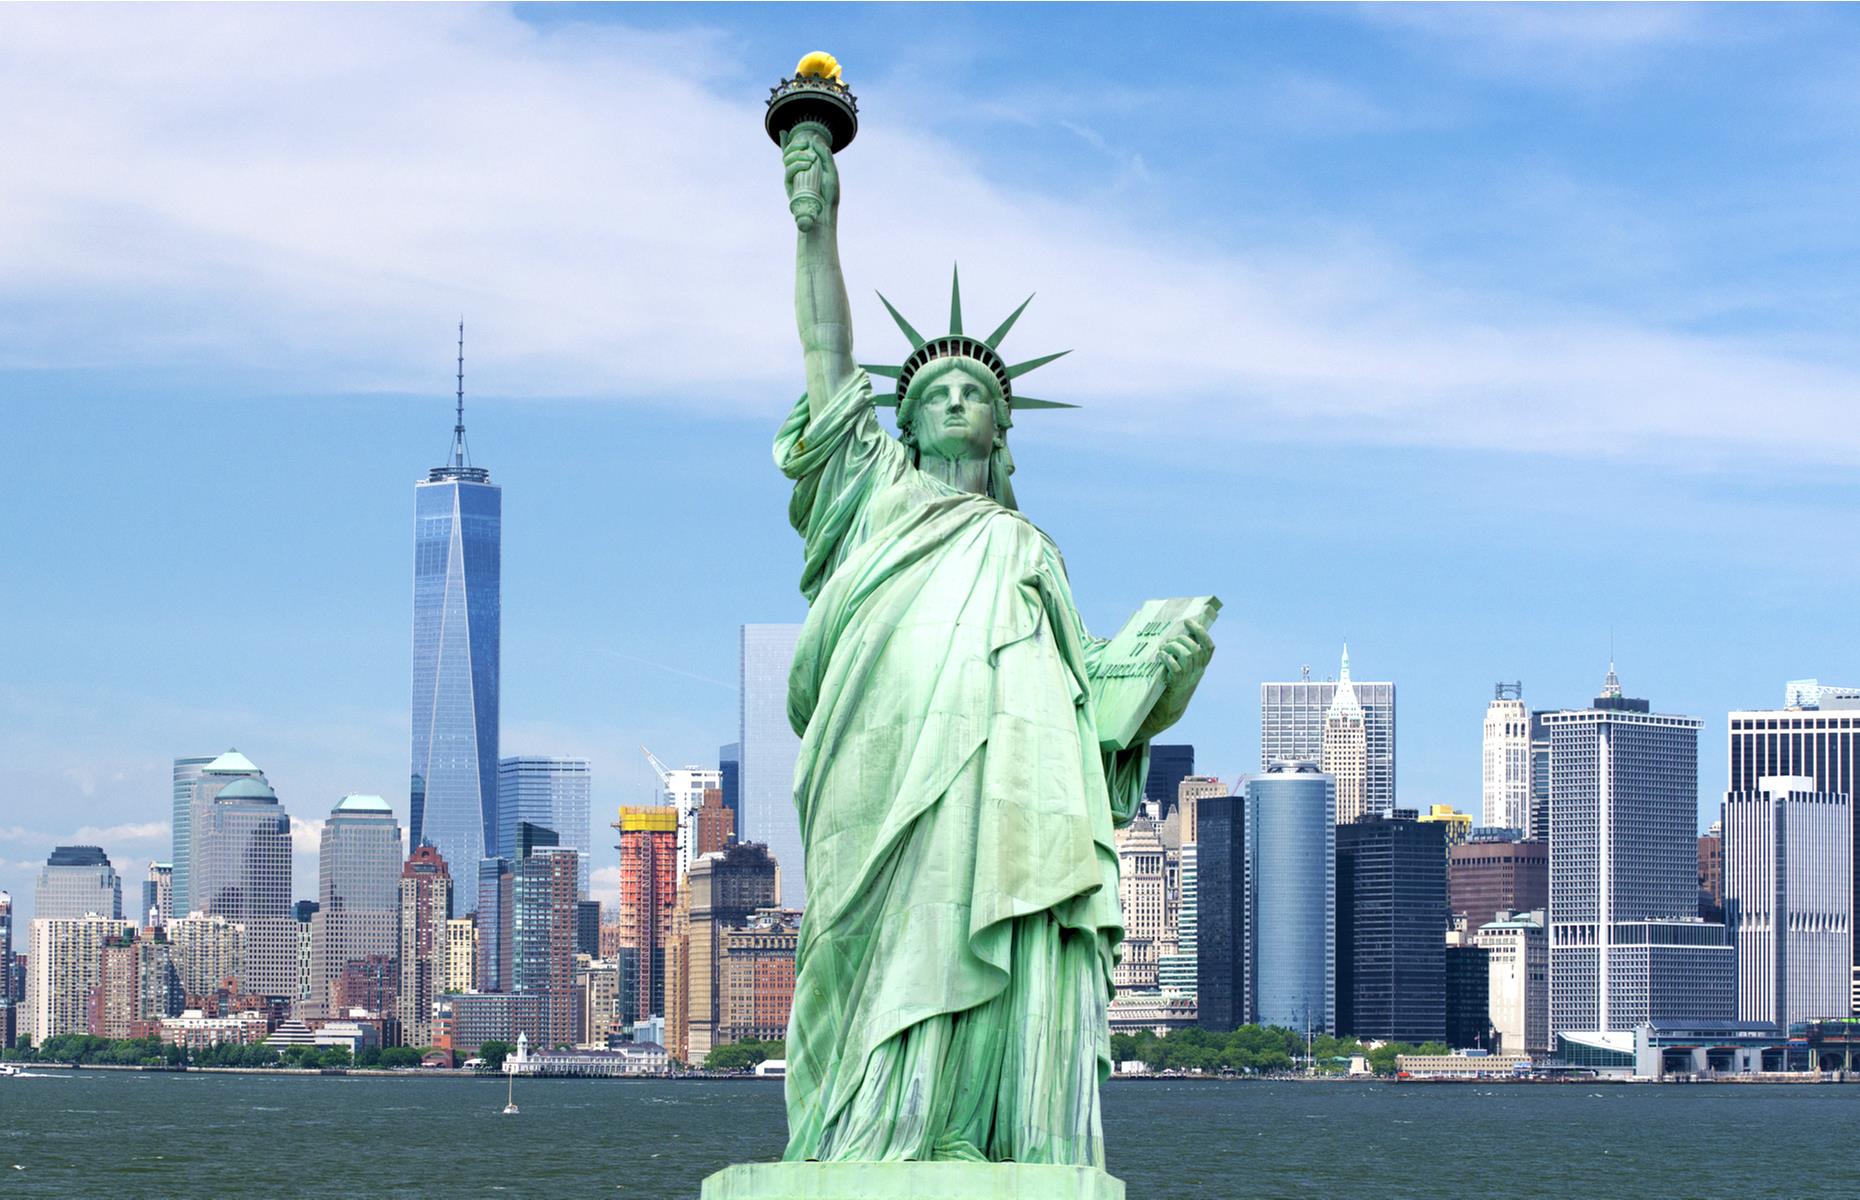 <p>New York has more wish-list attractions than most, but <a href="https://www.nps.gov/stli/index.htm">Lady Liberty</a> remains an enduring symbol of the city, the state and the US as a whole. A gift from France in the 19th century, the famous green statue towers to 305 feet (93m), offering fabulous views over New York from her crown. Make time to visit the Statue of Liberty Museum to learn more about the monument's history. </p>  <p><a href="https://www.loveexploring.com/guides/78385/new-york-things-to-do"><strong>Get the best of the Big Apple with our city guide</strong></a></p>